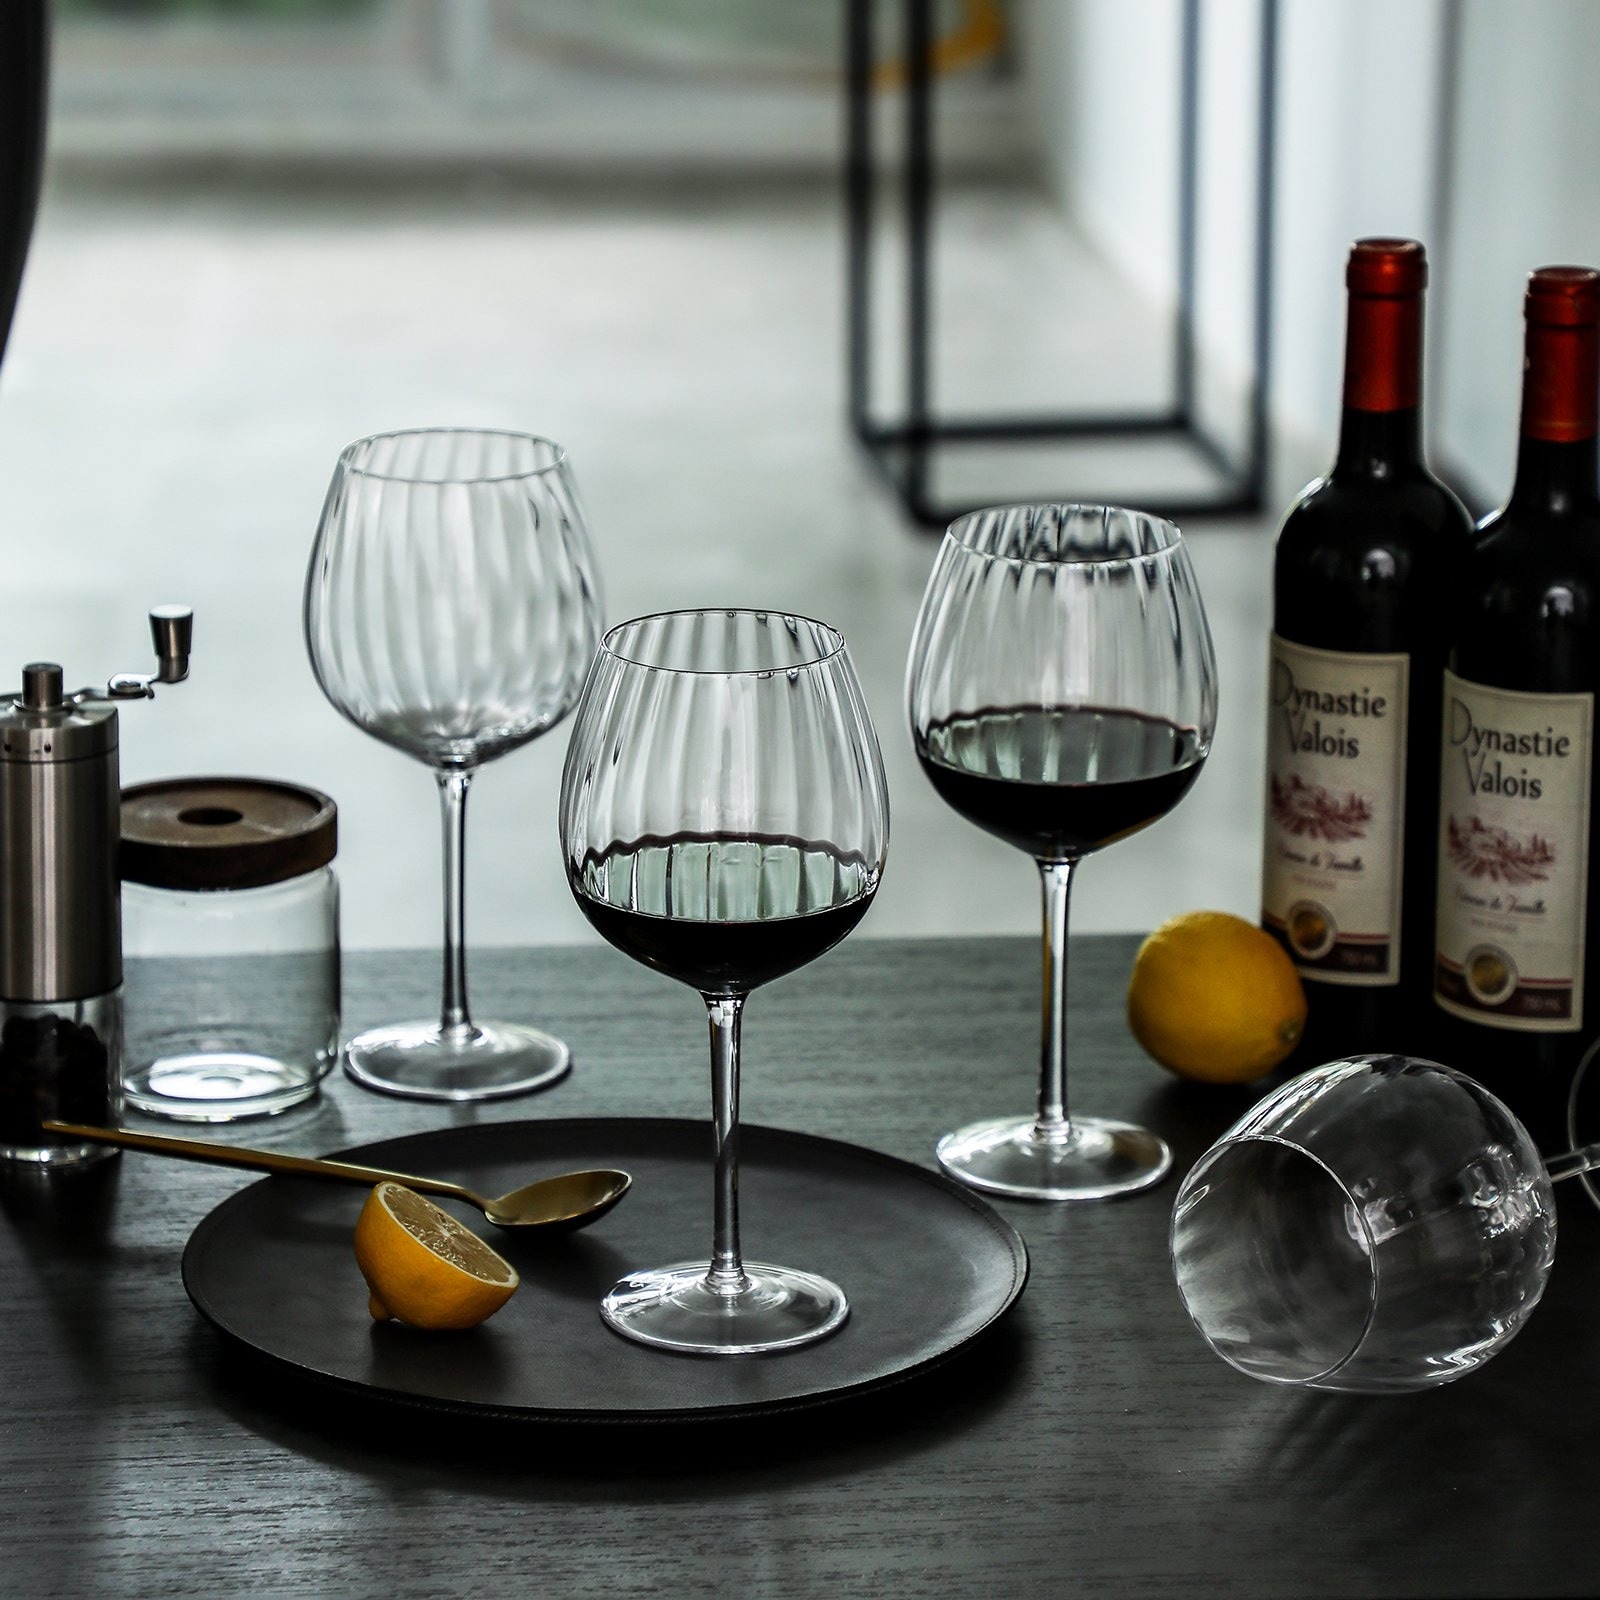 https://ak1.ostkcdn.com/images/products/is/images/direct/2146bff81dd1ef7796752f0ab8f84cade300b732/Ribbed-Optic-Wine-Glasses-set-of-4.jpg